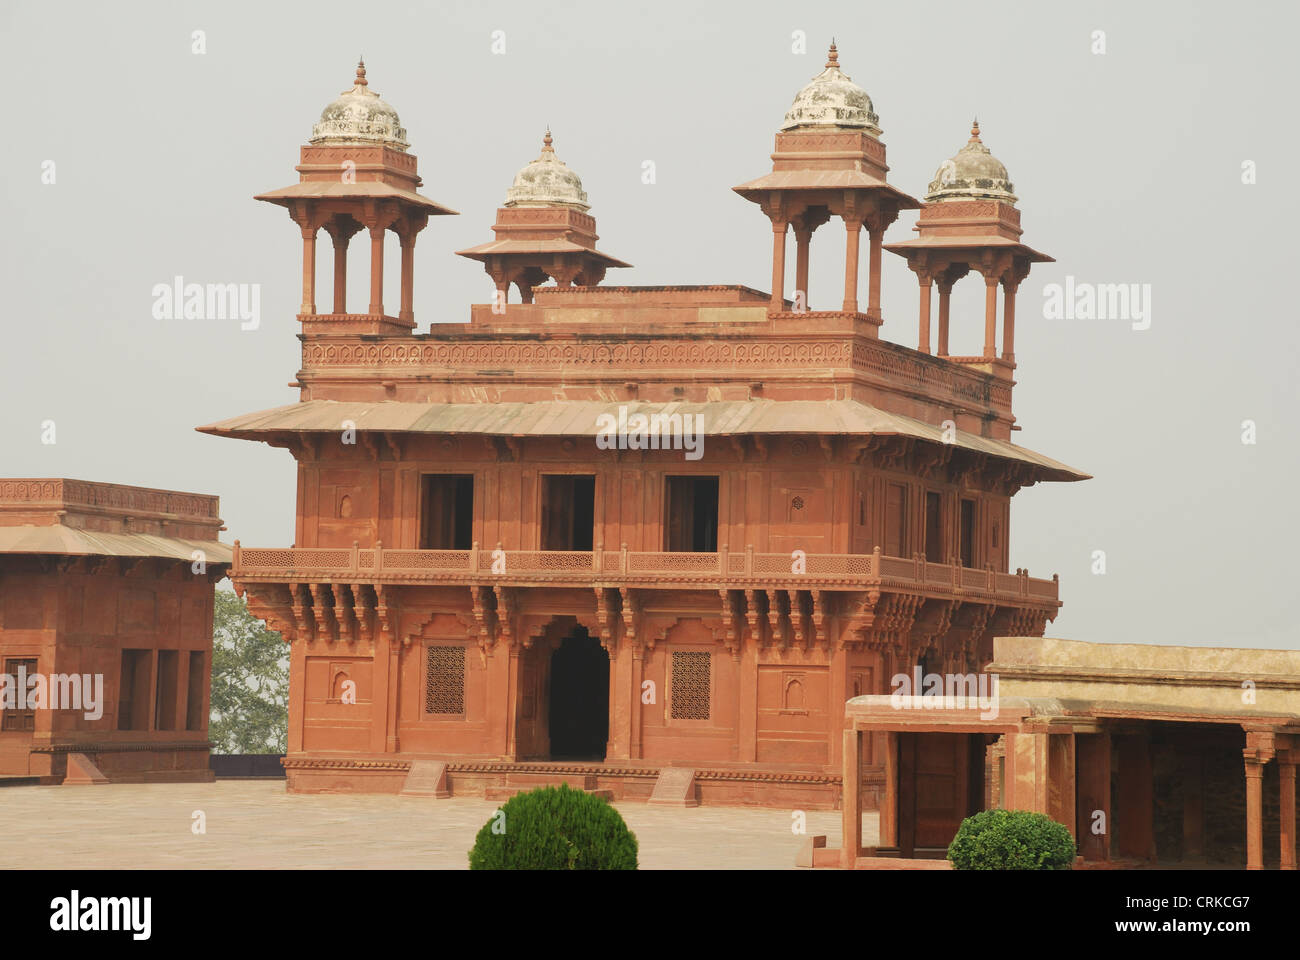 Diwan-i-khas, Hall of private audience, Is a plain square building with four chhatris on the roof, Fatehpur Sikri Stock Photo